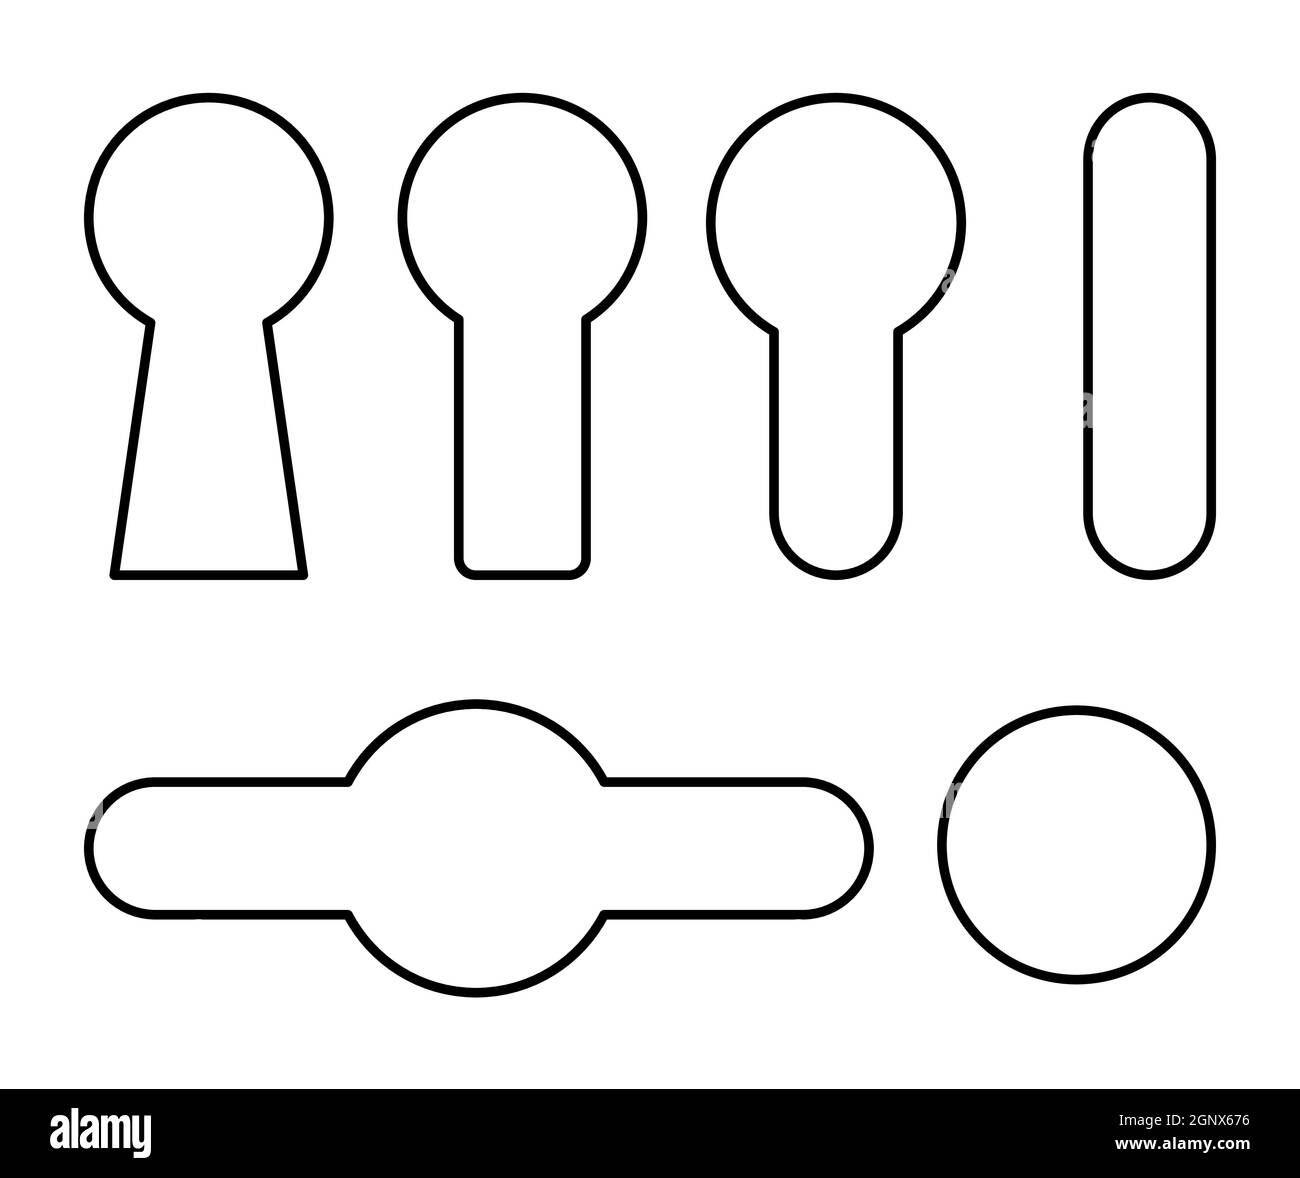 Keyhole outline symbol set. Line contour shapes collections with lock holes icons. Concept of spy protection and curiosity. Vector design isolated on white backlground. Stock Vector